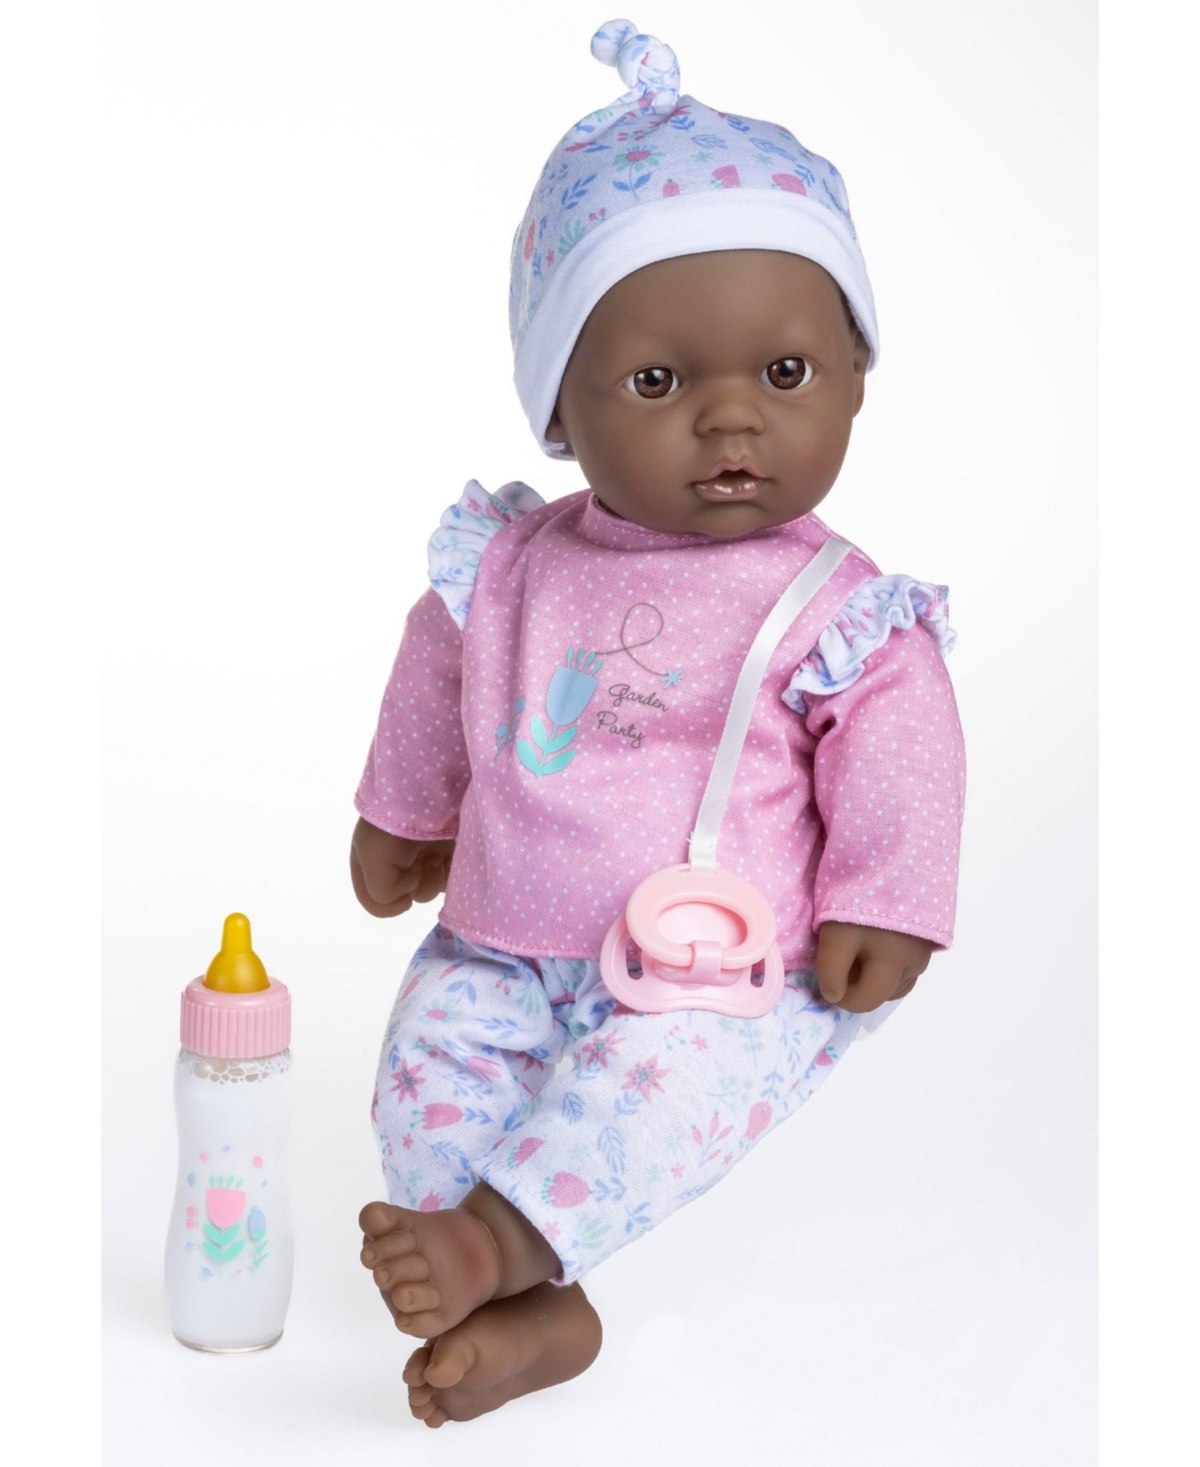 Jc Toys La Baby African American 14.3" Soft Body Baby Doll 3-piece Outfit With Pacifier, Magic Bottle Set In Multicolor